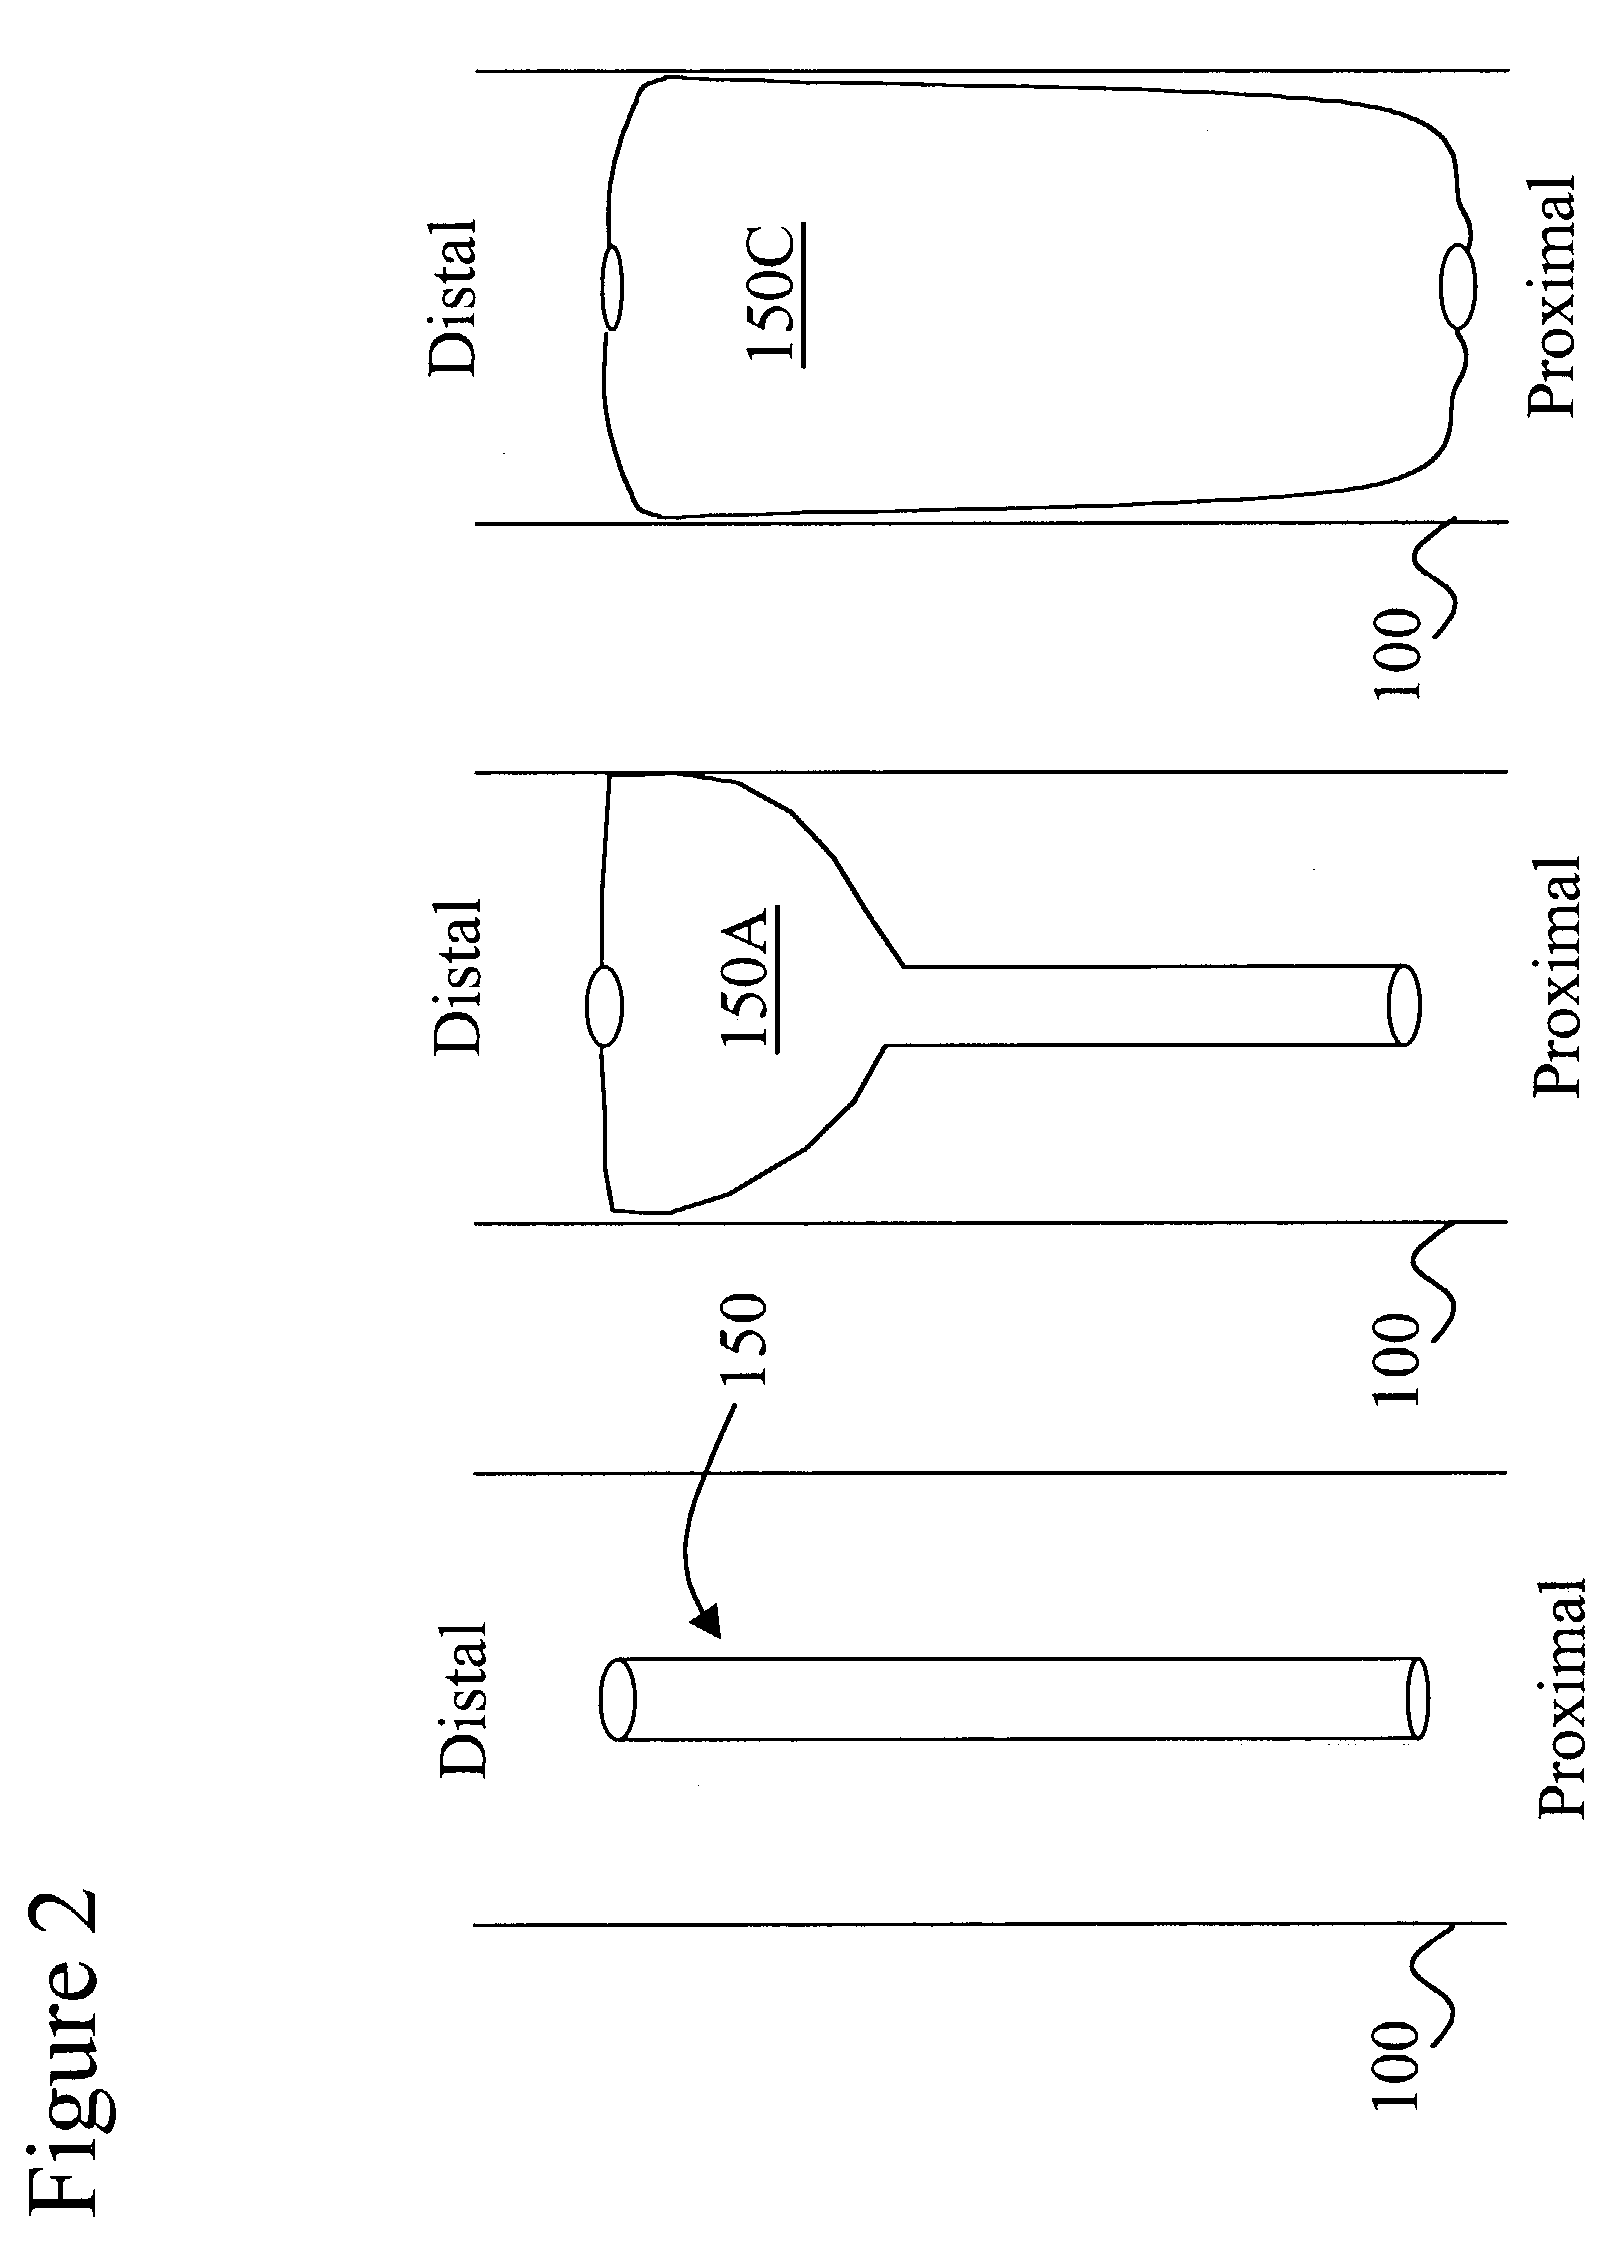 Device and method for medical interventions of body lumens